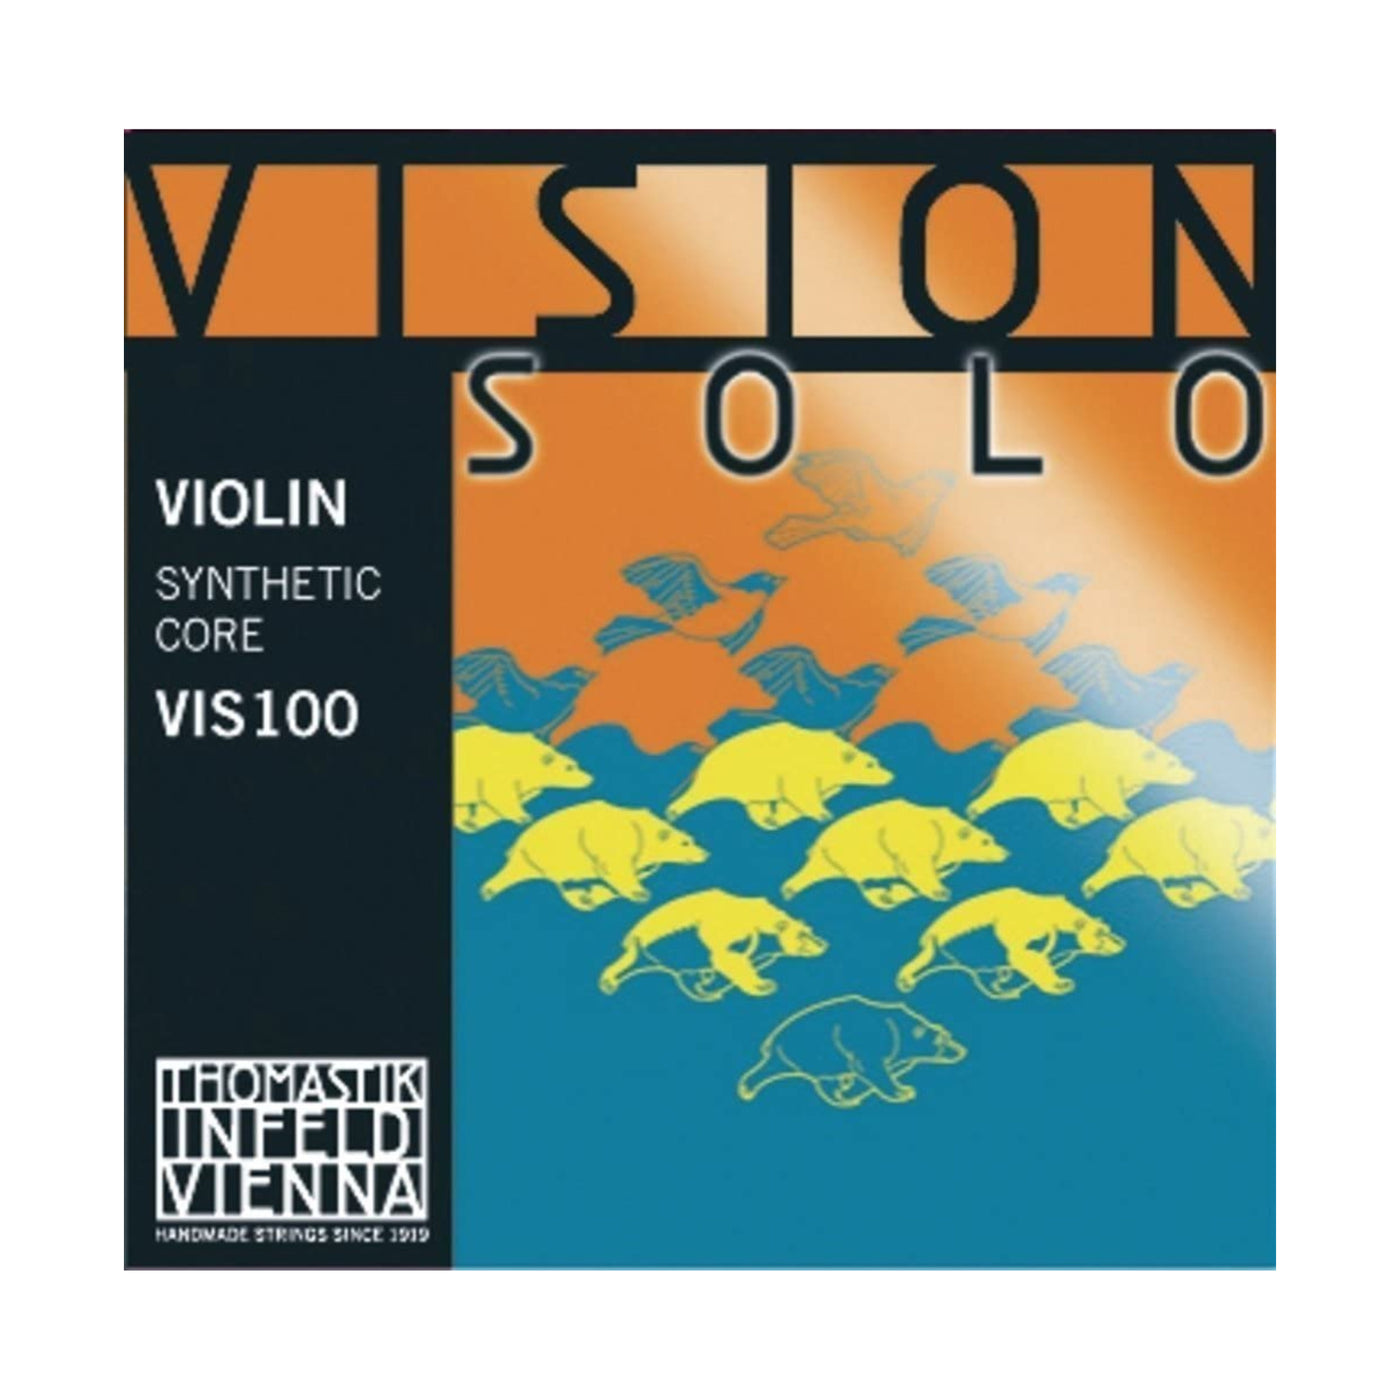 Thomastik Infeld Strings For Violin Vision Solo Set (Silver D) 4/4 Medium, Modern Synthetic Core, Wound, VIS101